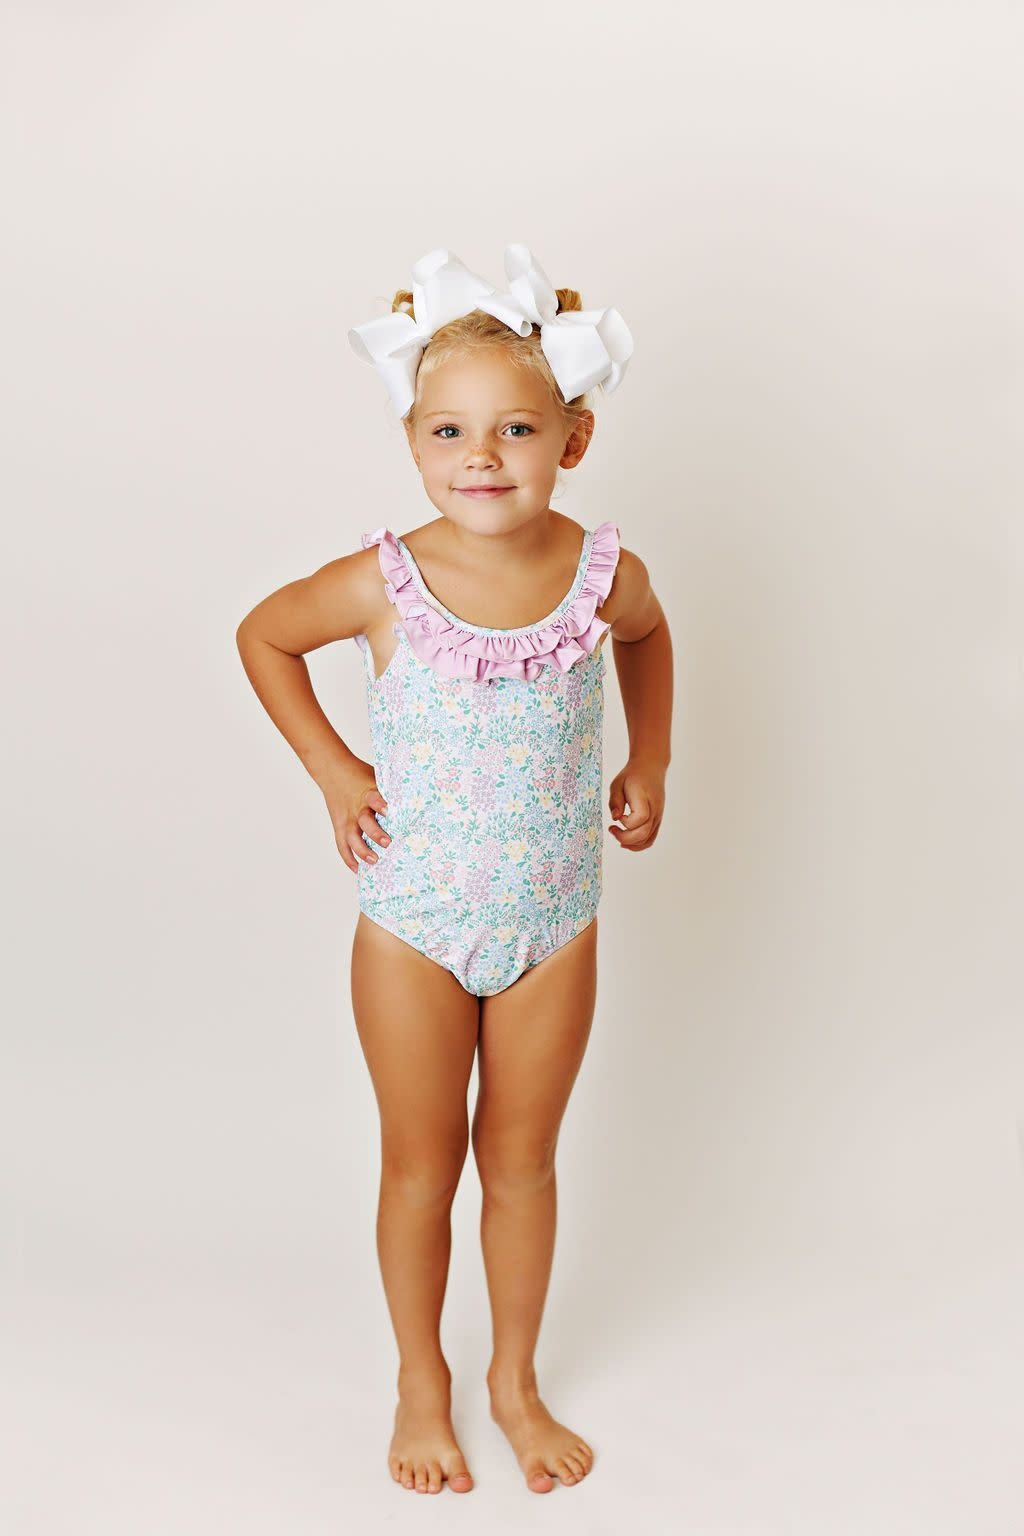 Swoon Baby Clothing Girl Floral 1 pc Swimsuit